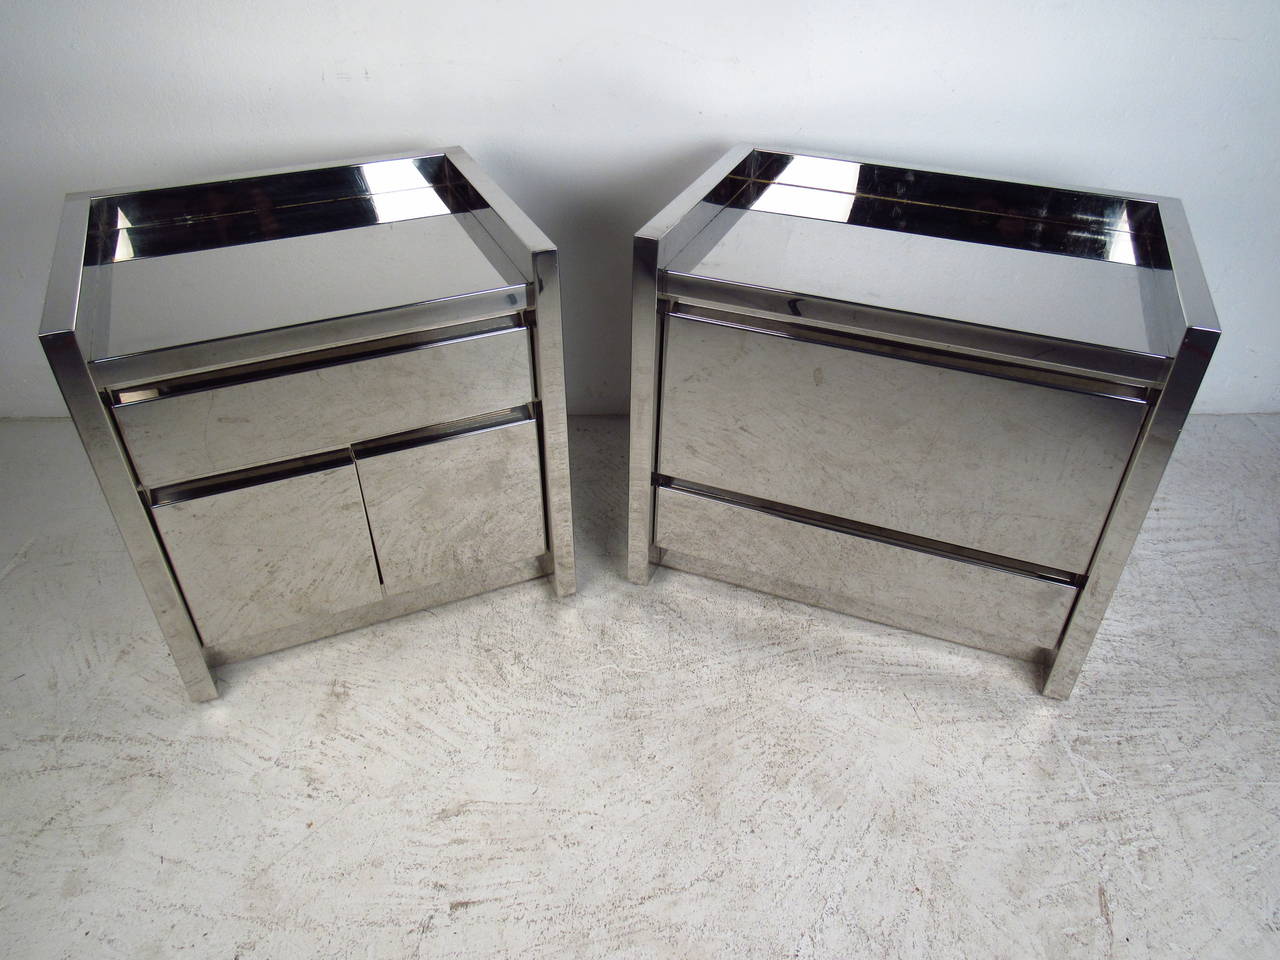 Mirror like bedside cabinets in polished chrome. One with two drawers and one with drawer and cabinet space.
Measures: One is 28